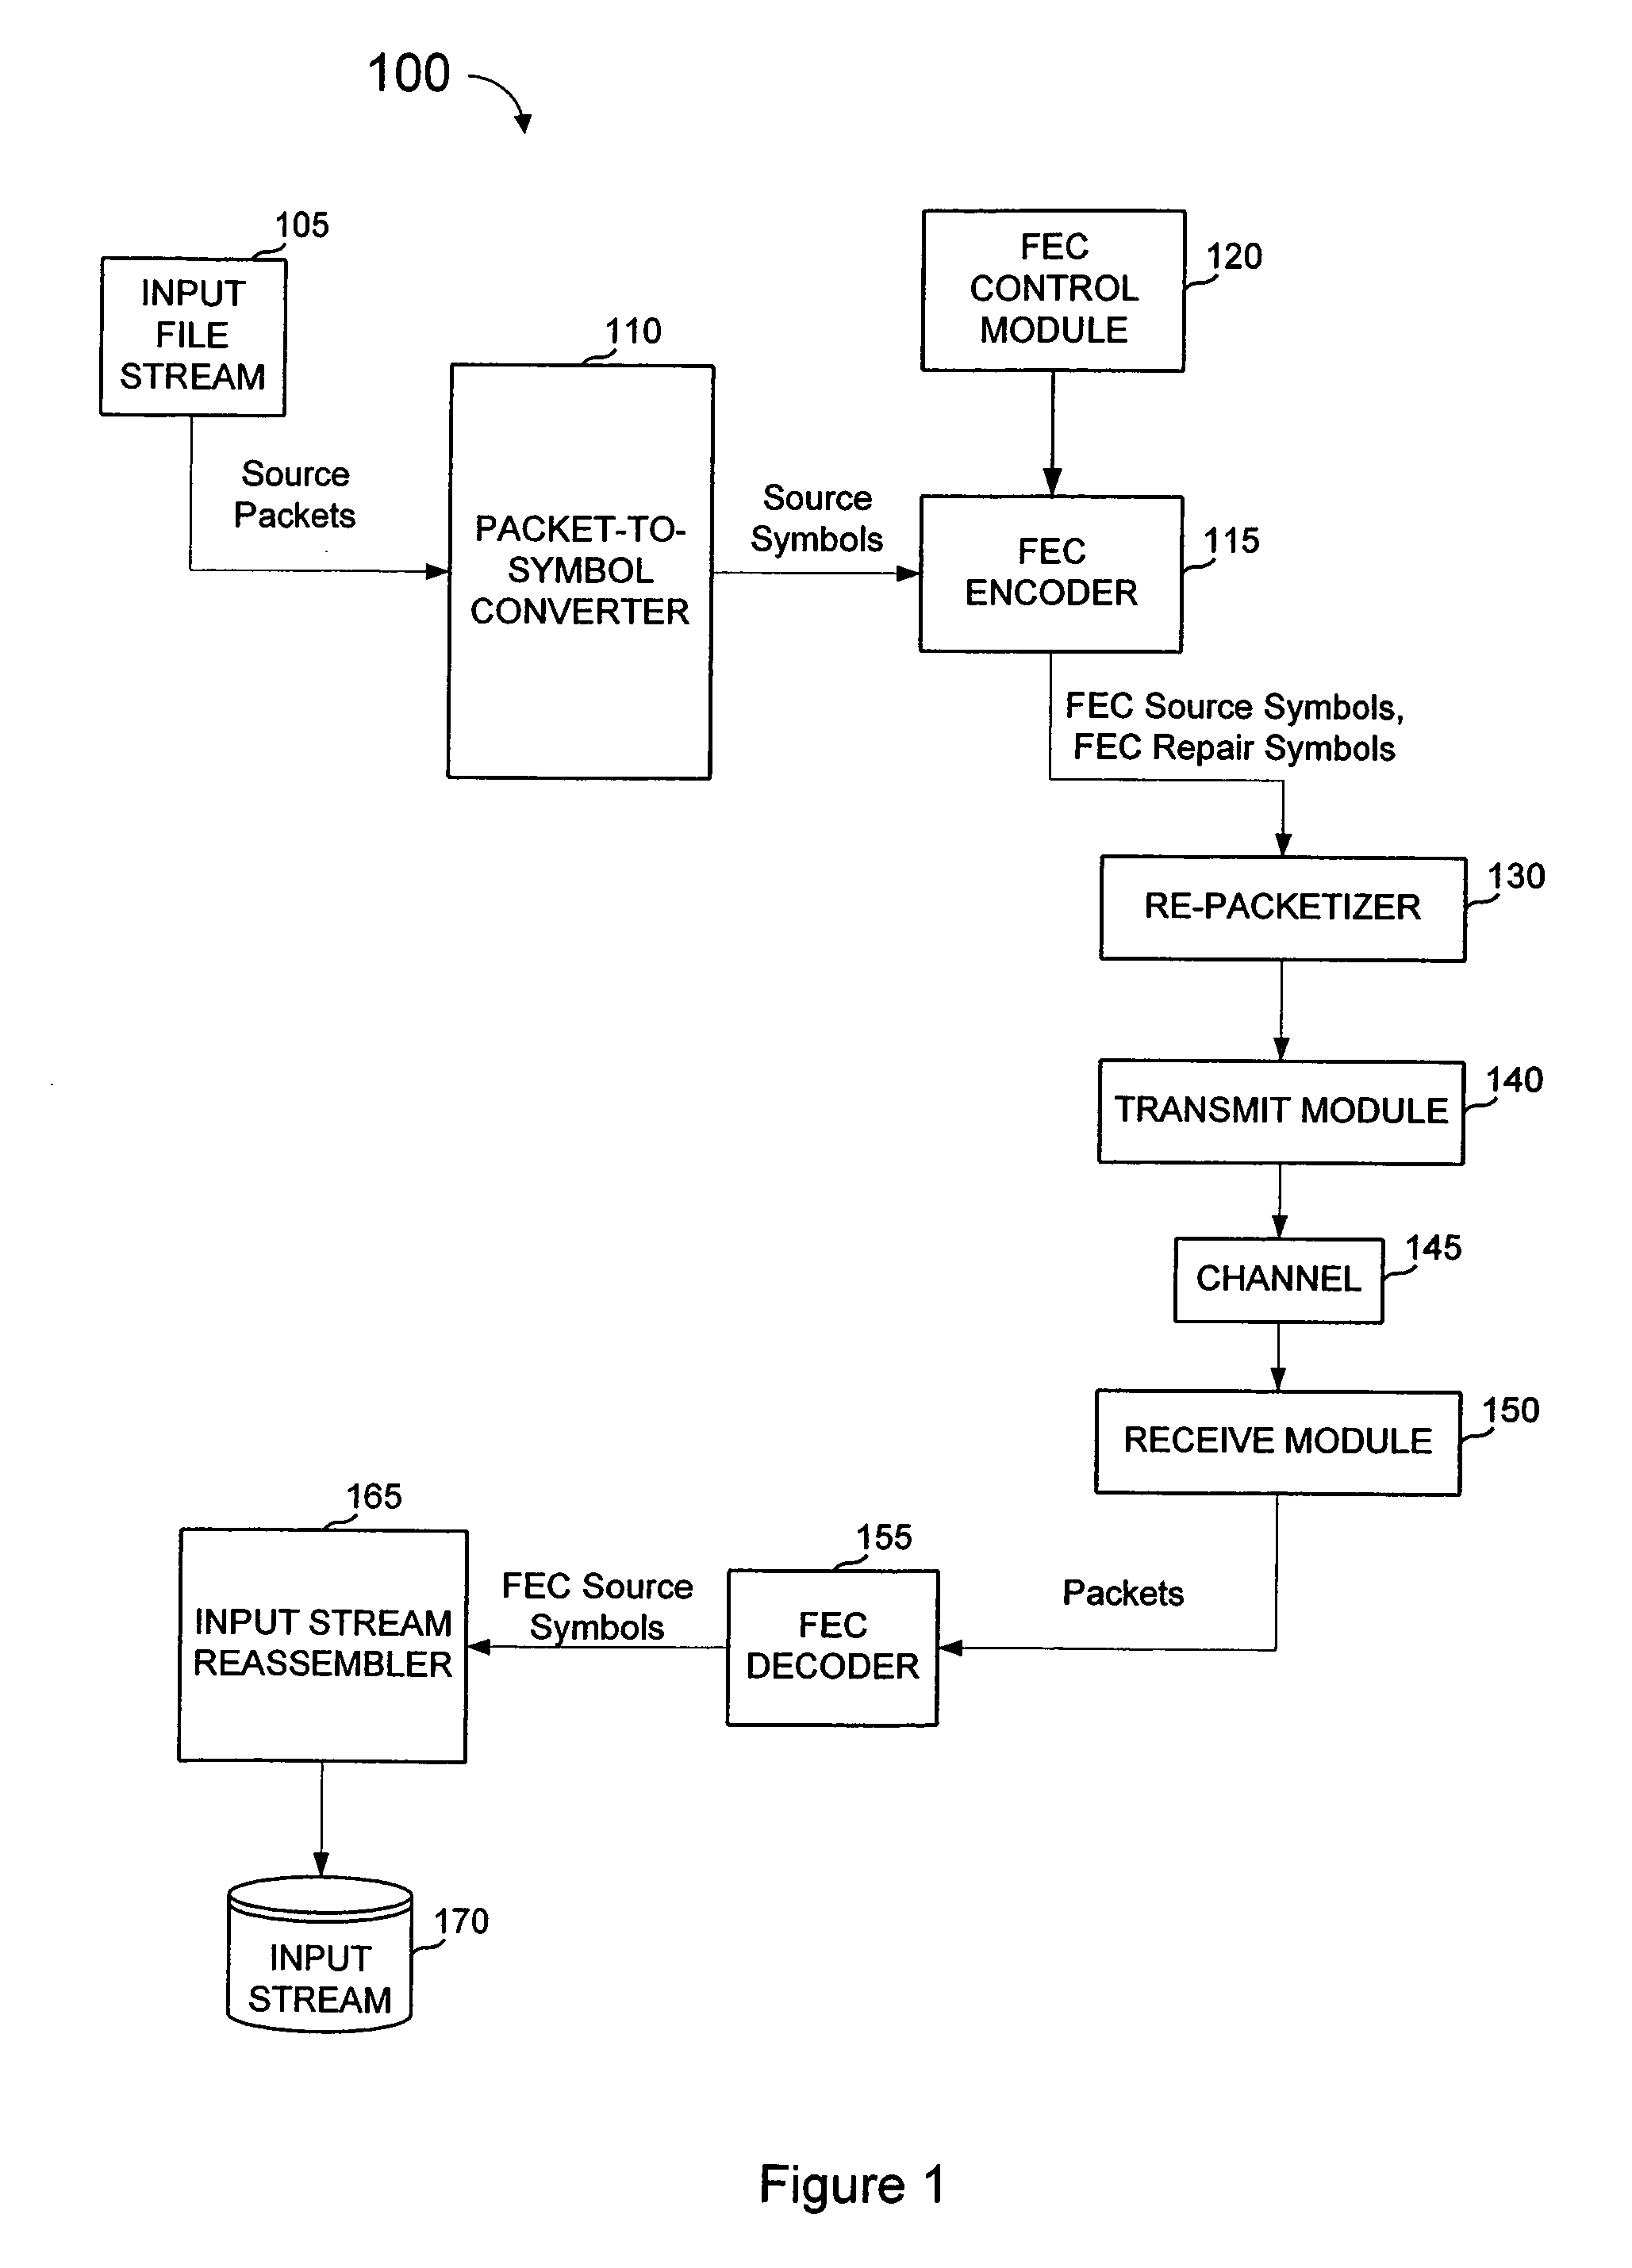 FEC architecture for streaming services including symbol-based operations and packet tagging